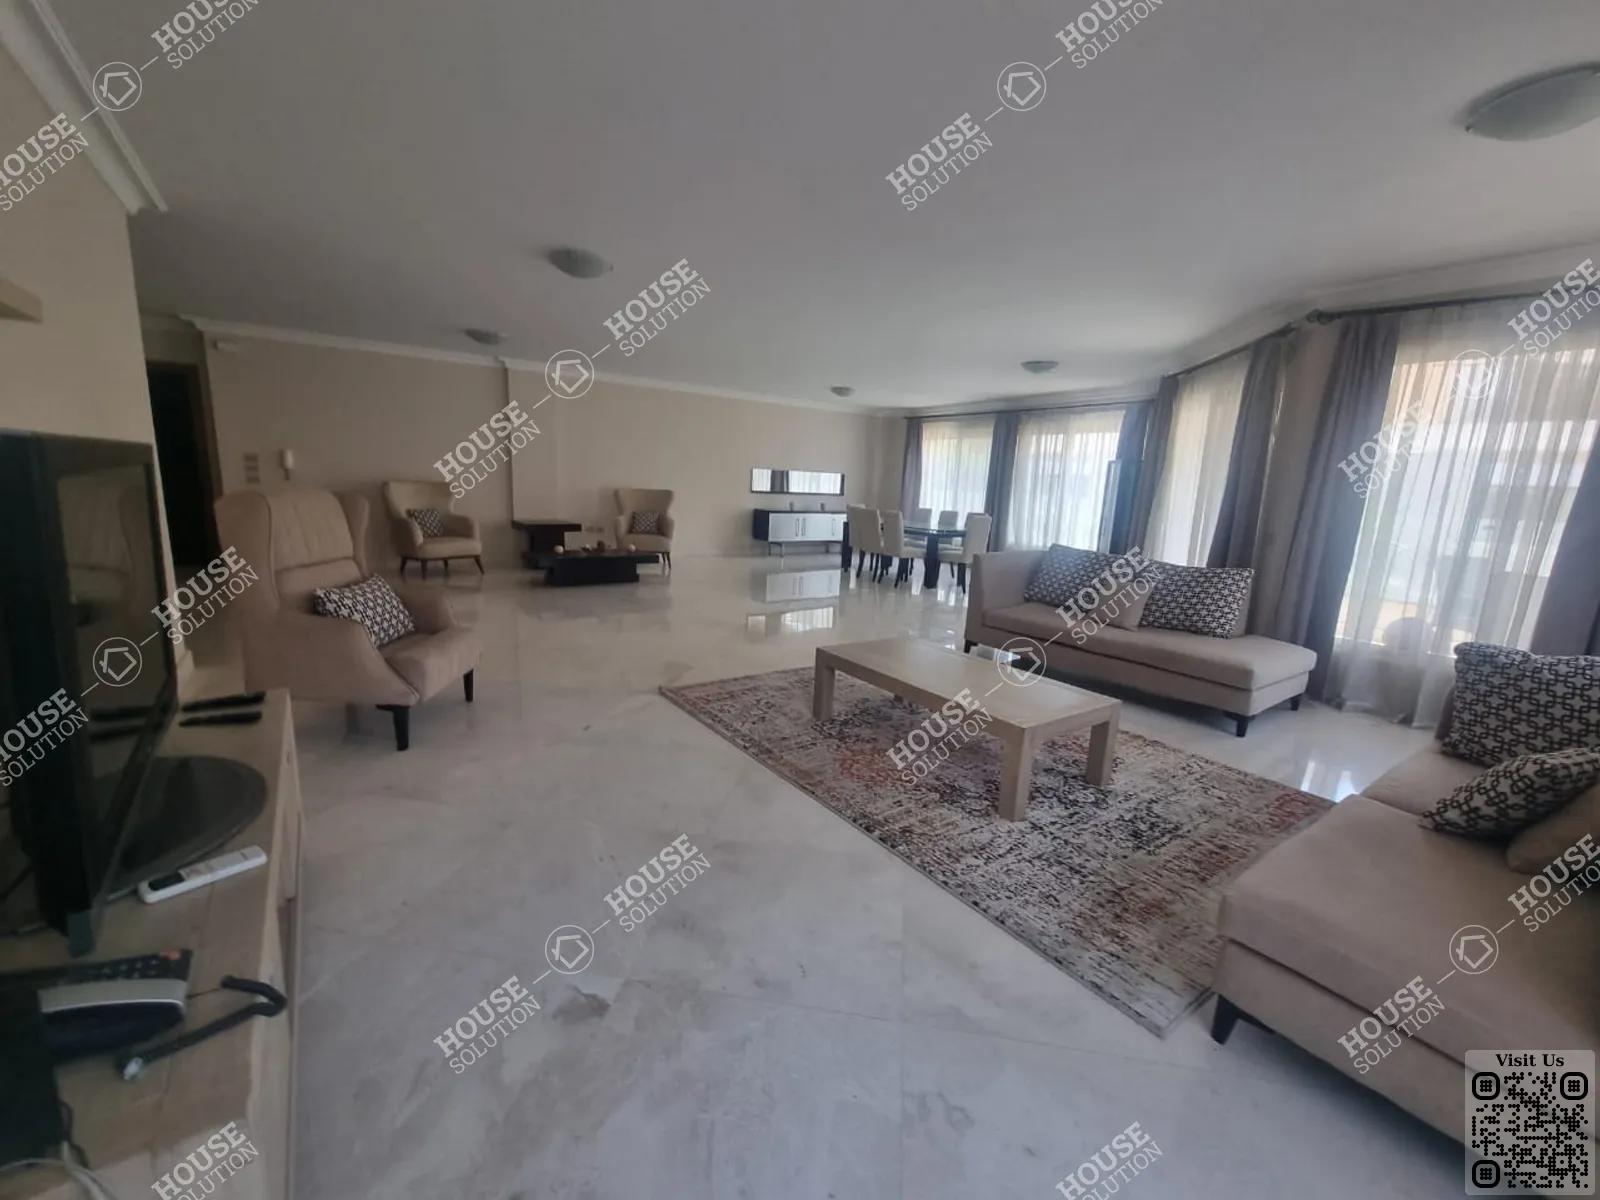 RECEPTION  @ Apartments For Rent In Maadi Maadi Sarayat Area: 320 m² consists of 4 Bedrooms 4 Bathrooms Modern furnished 5 stars #5696-0